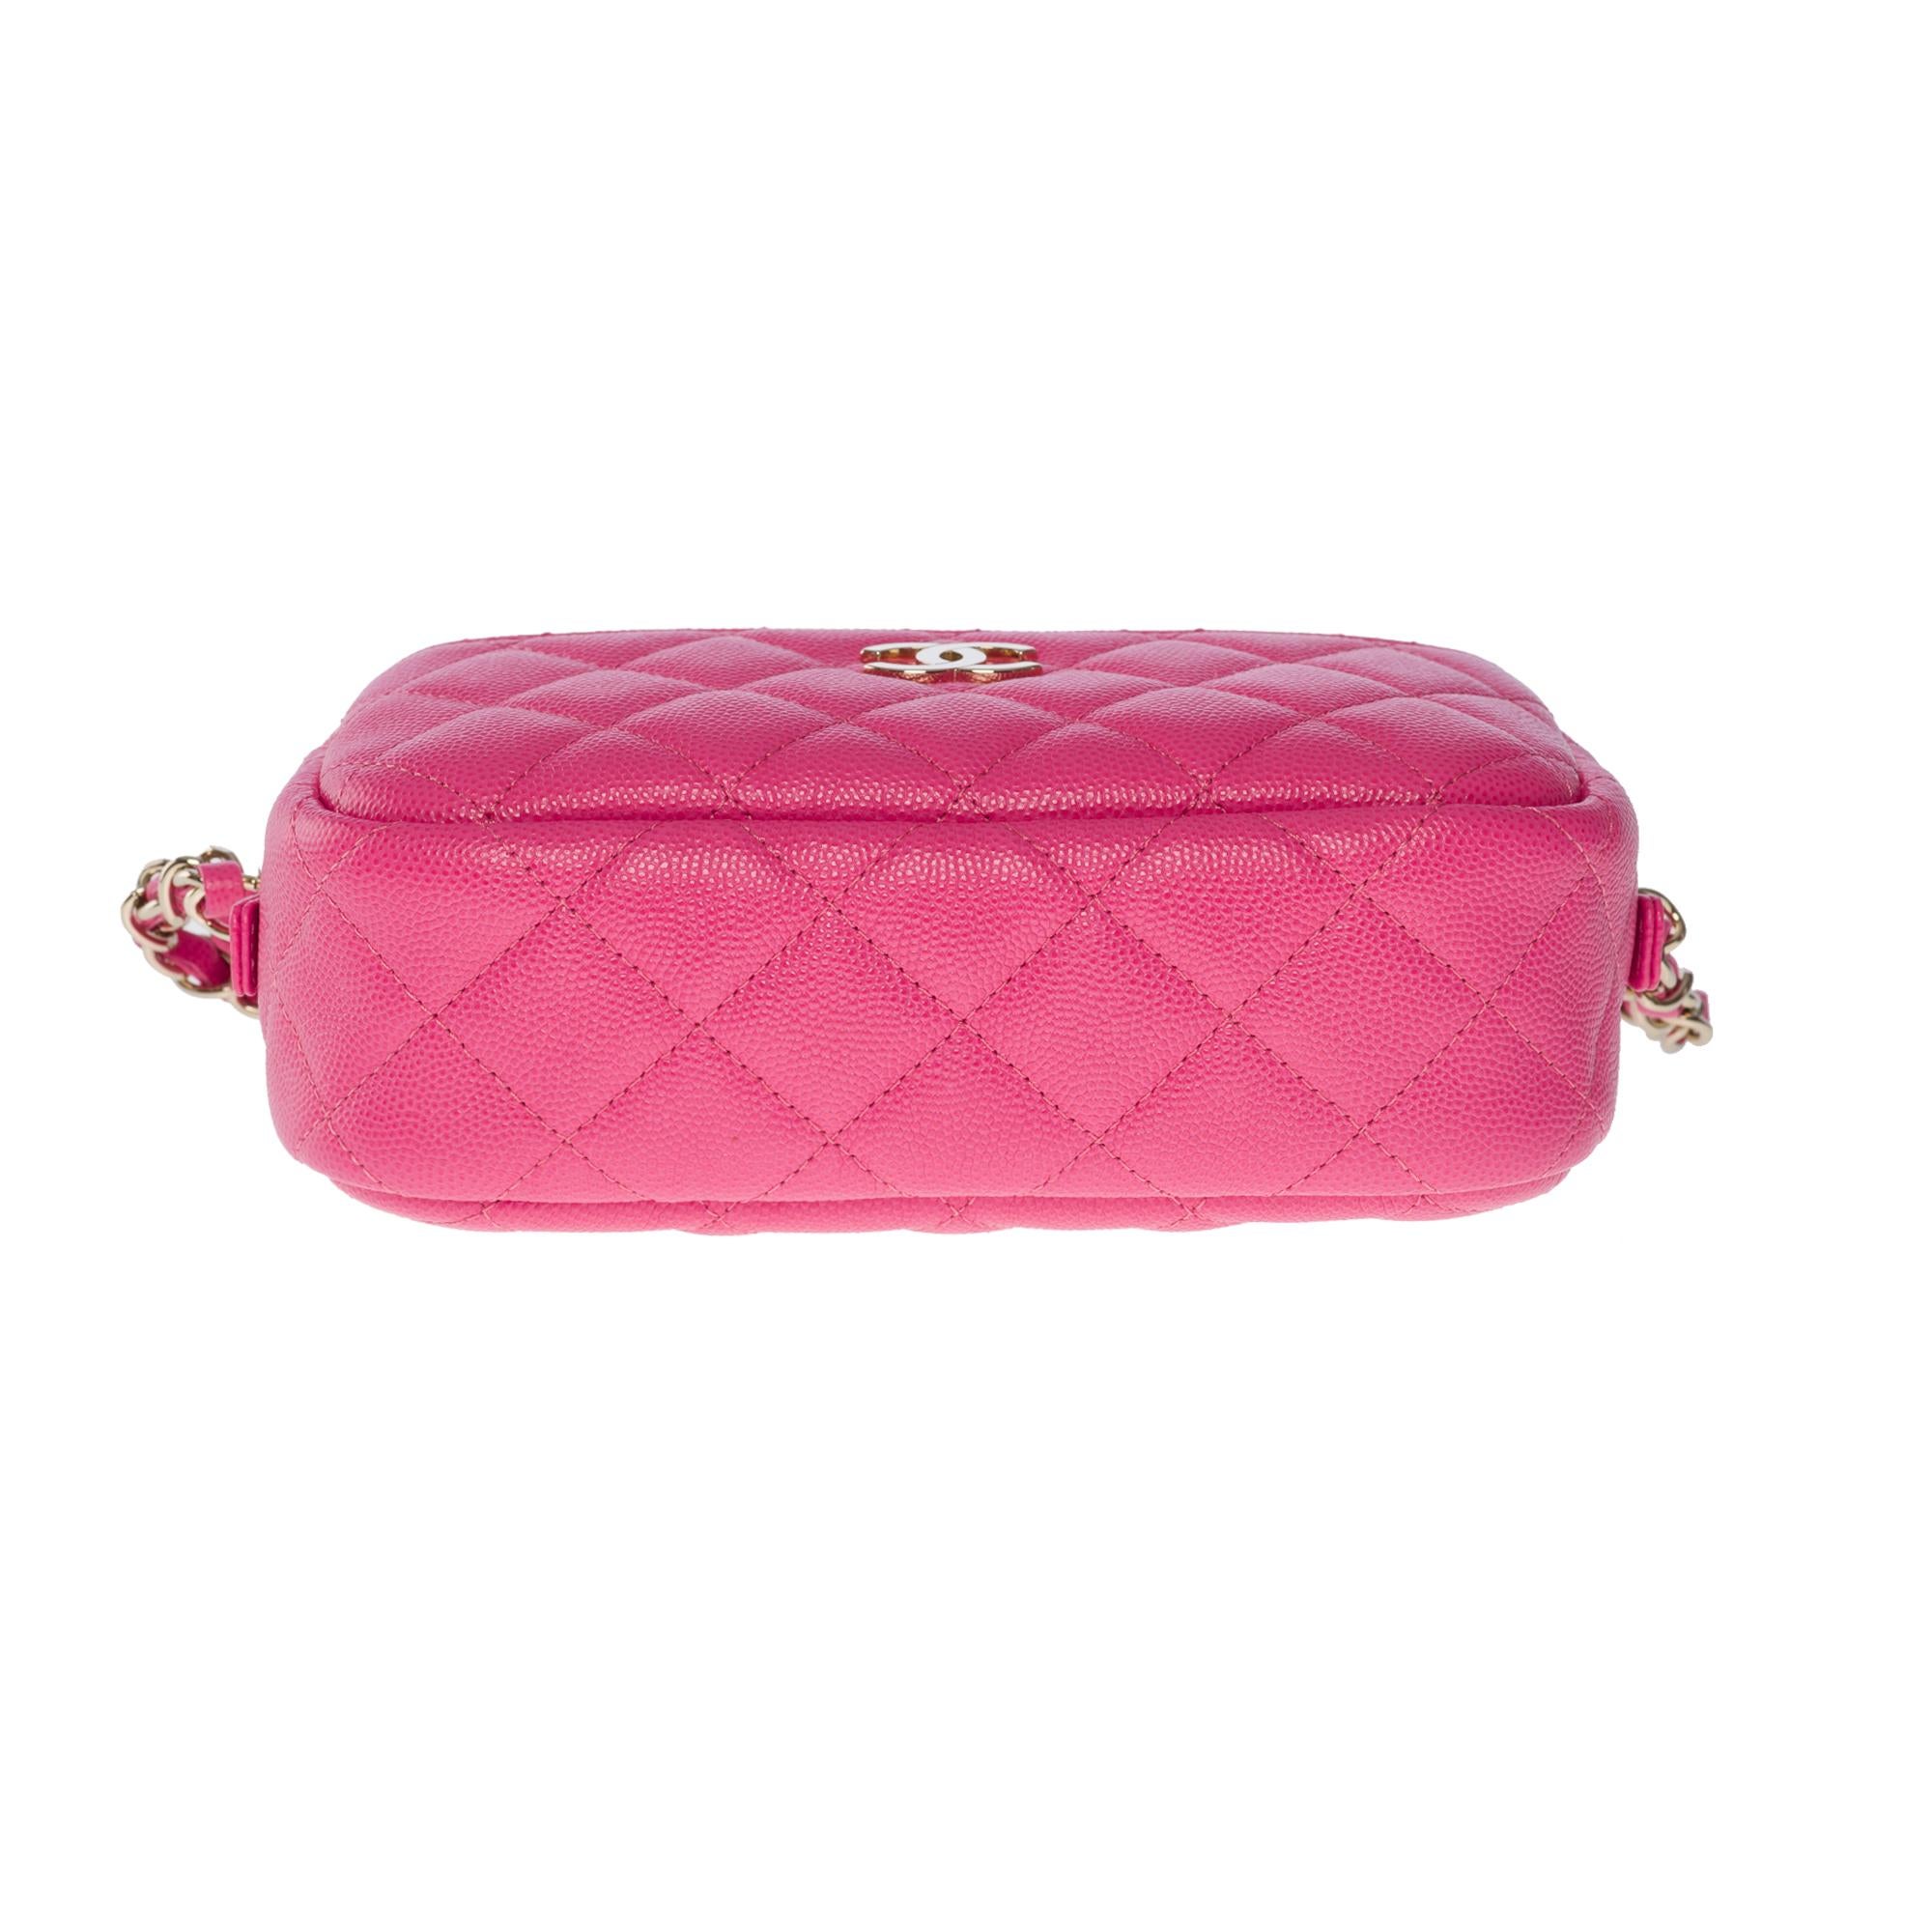 New- Amazing Chanel Mini Camera shoulder bag in Pink caviar leather, CHW 5